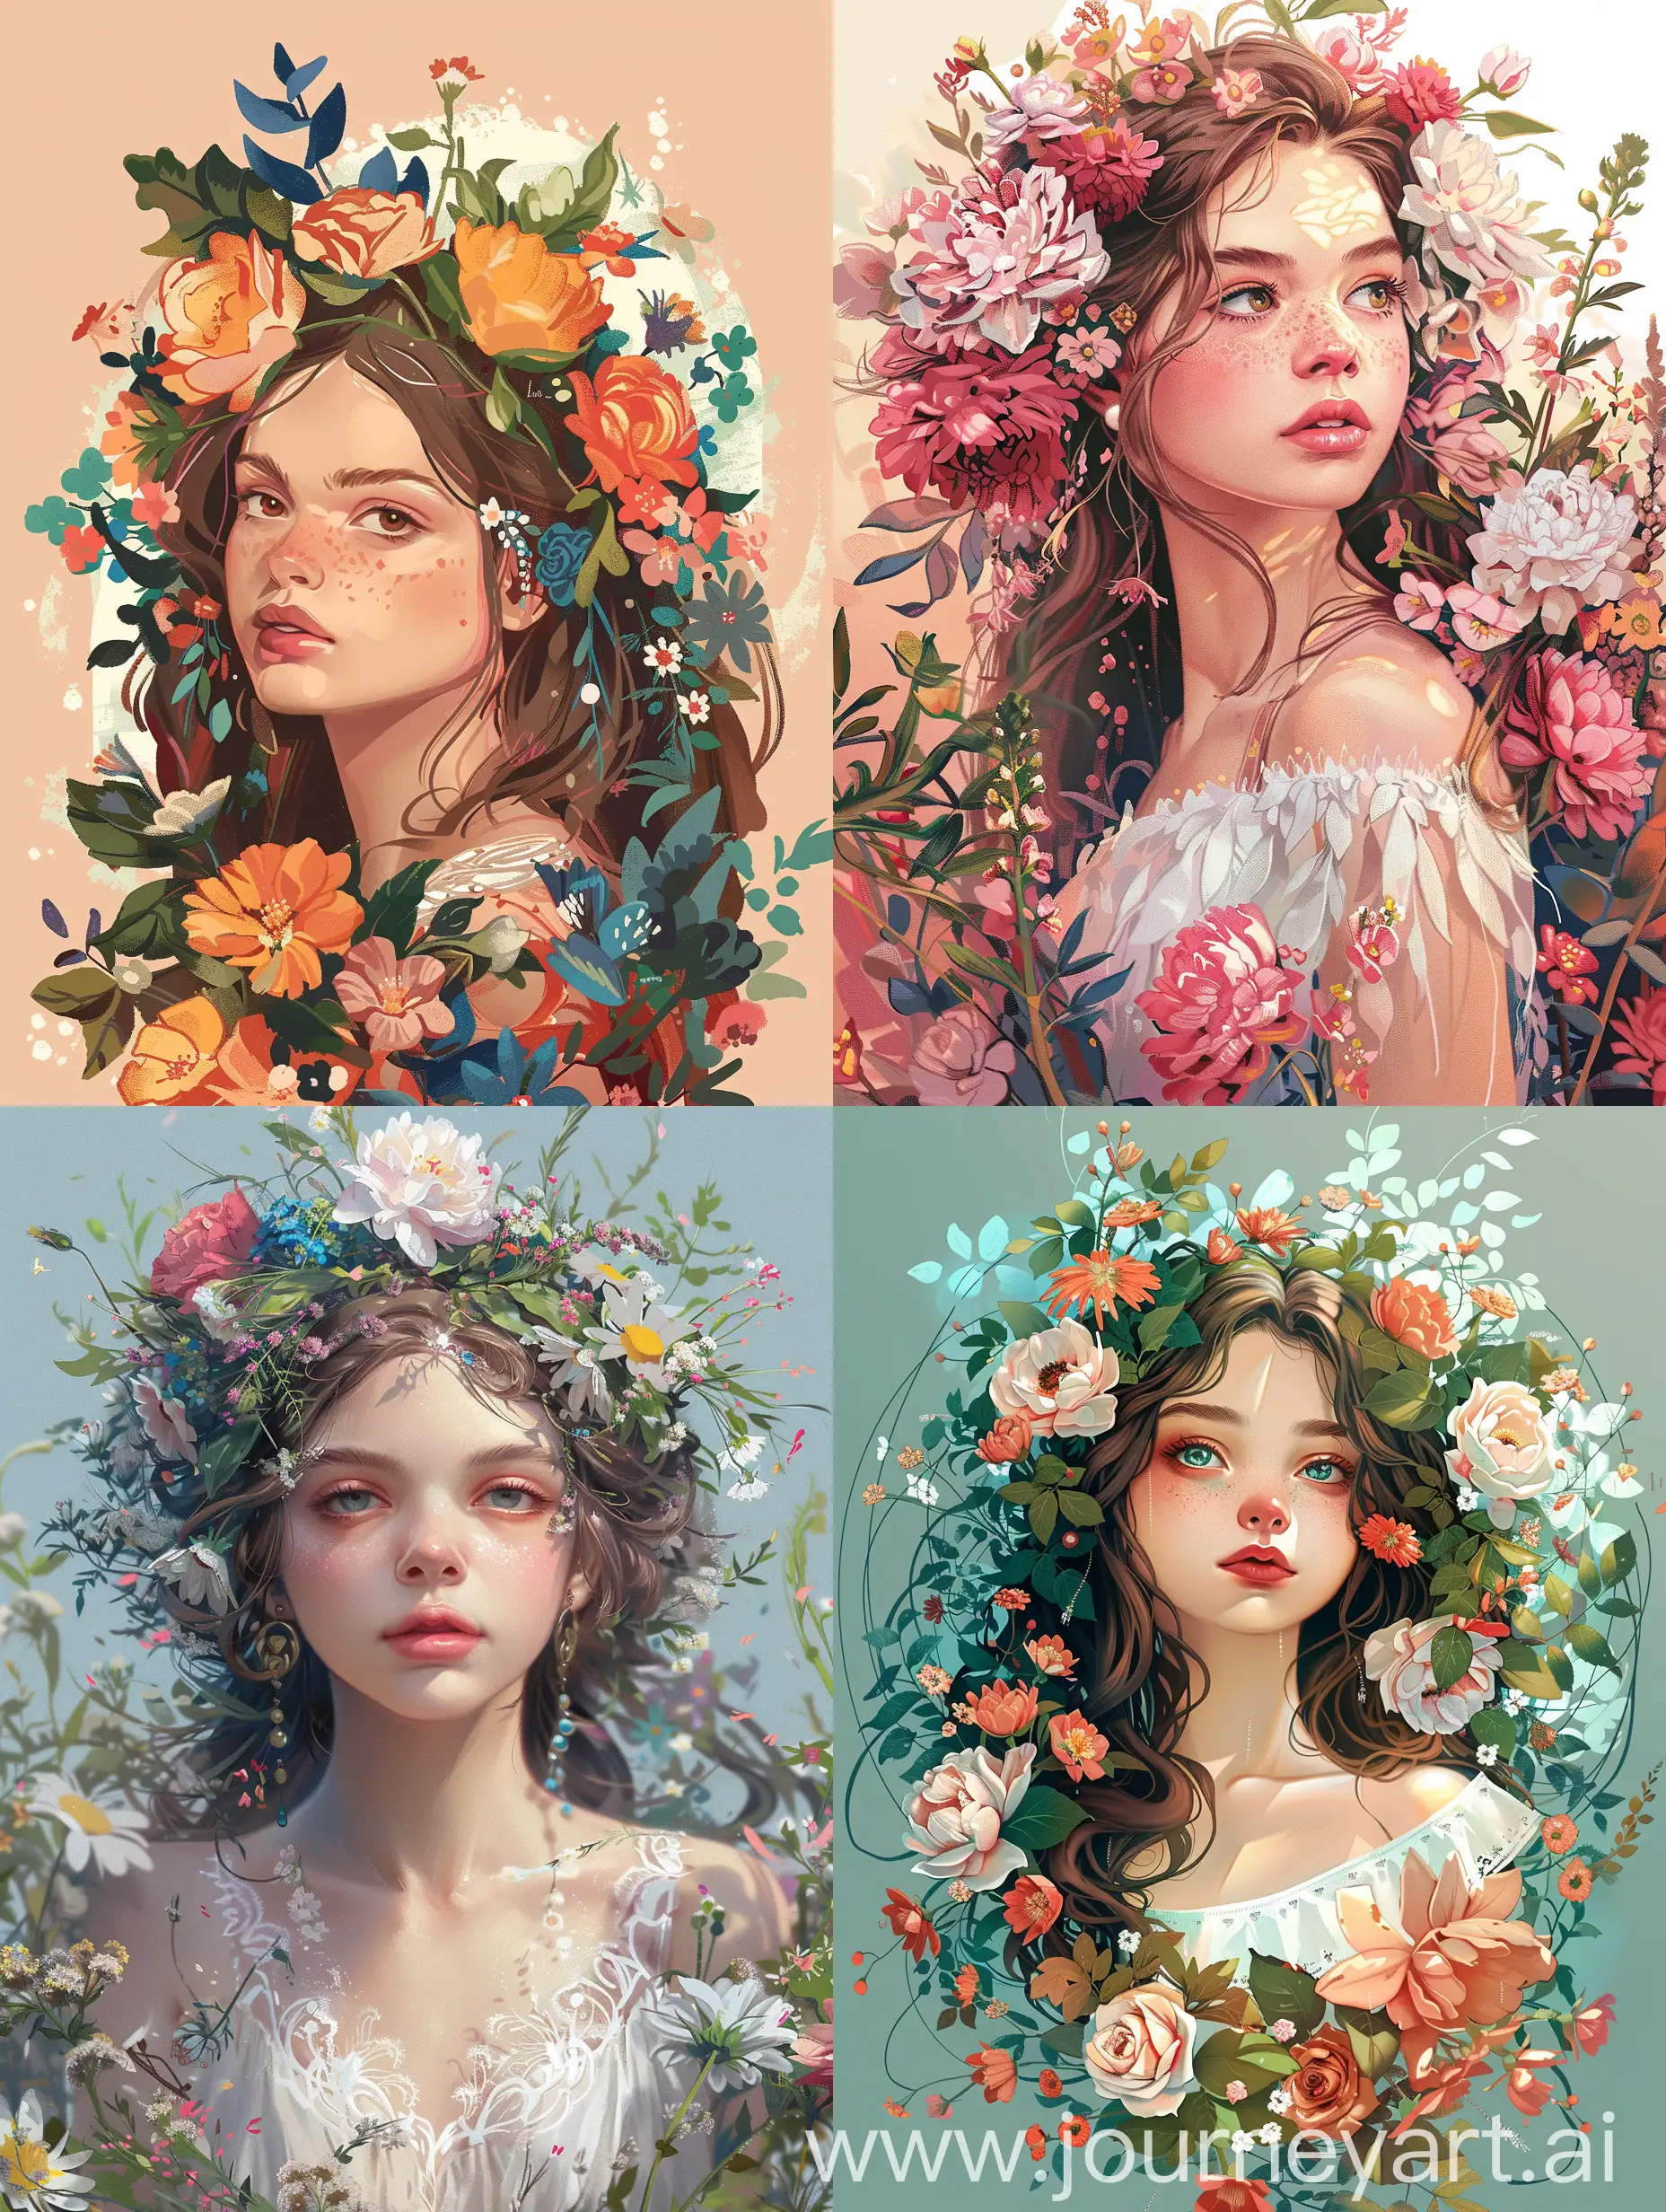 Illustrate Lada, the Slavic goddess of beauty and love. Craft an image of a young woman adorned with flowers and exuding an aura of harmony and affection